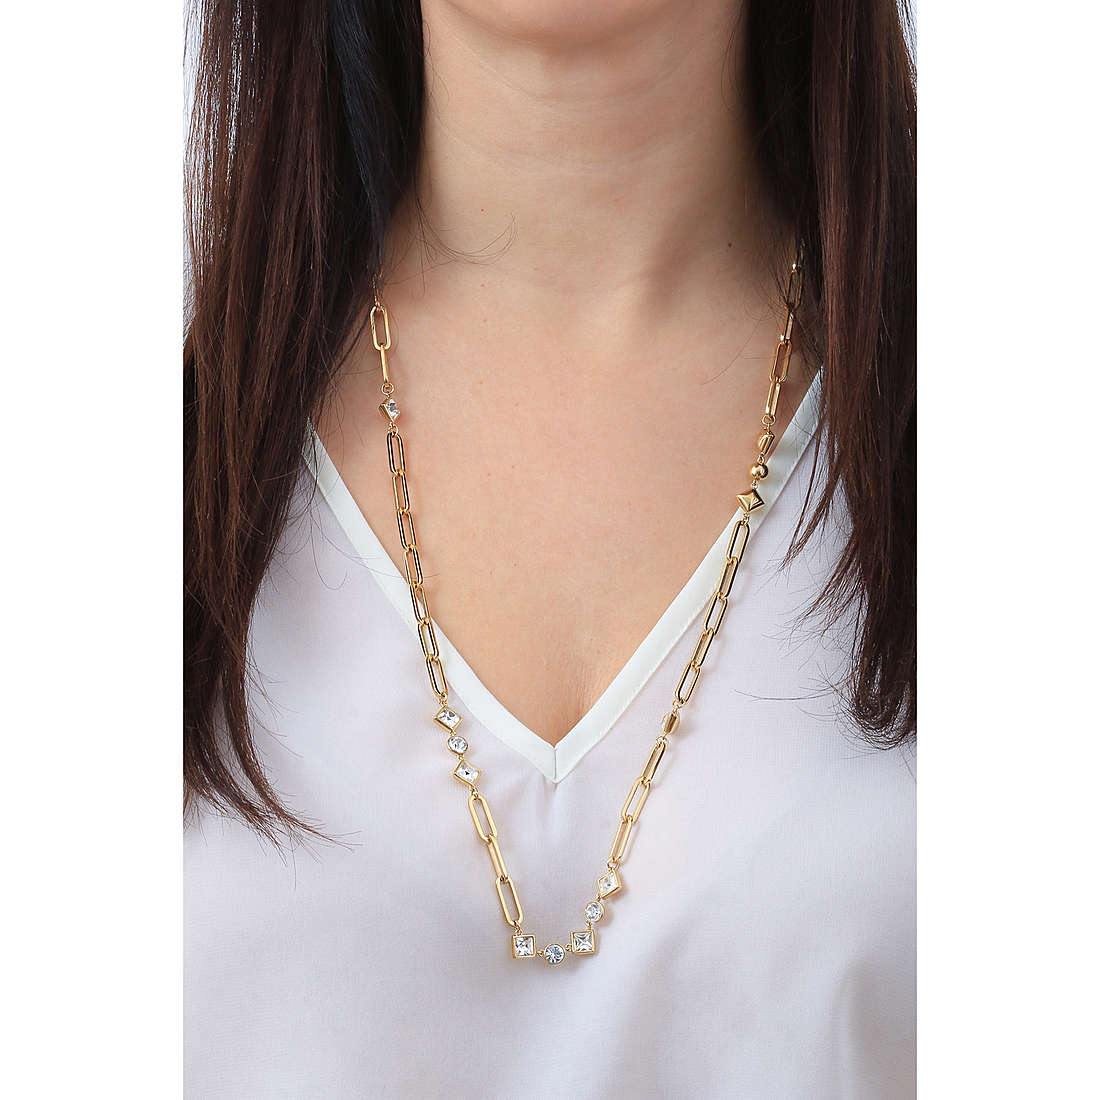 Brosway necklaces Emphasis woman BEH04 wearing